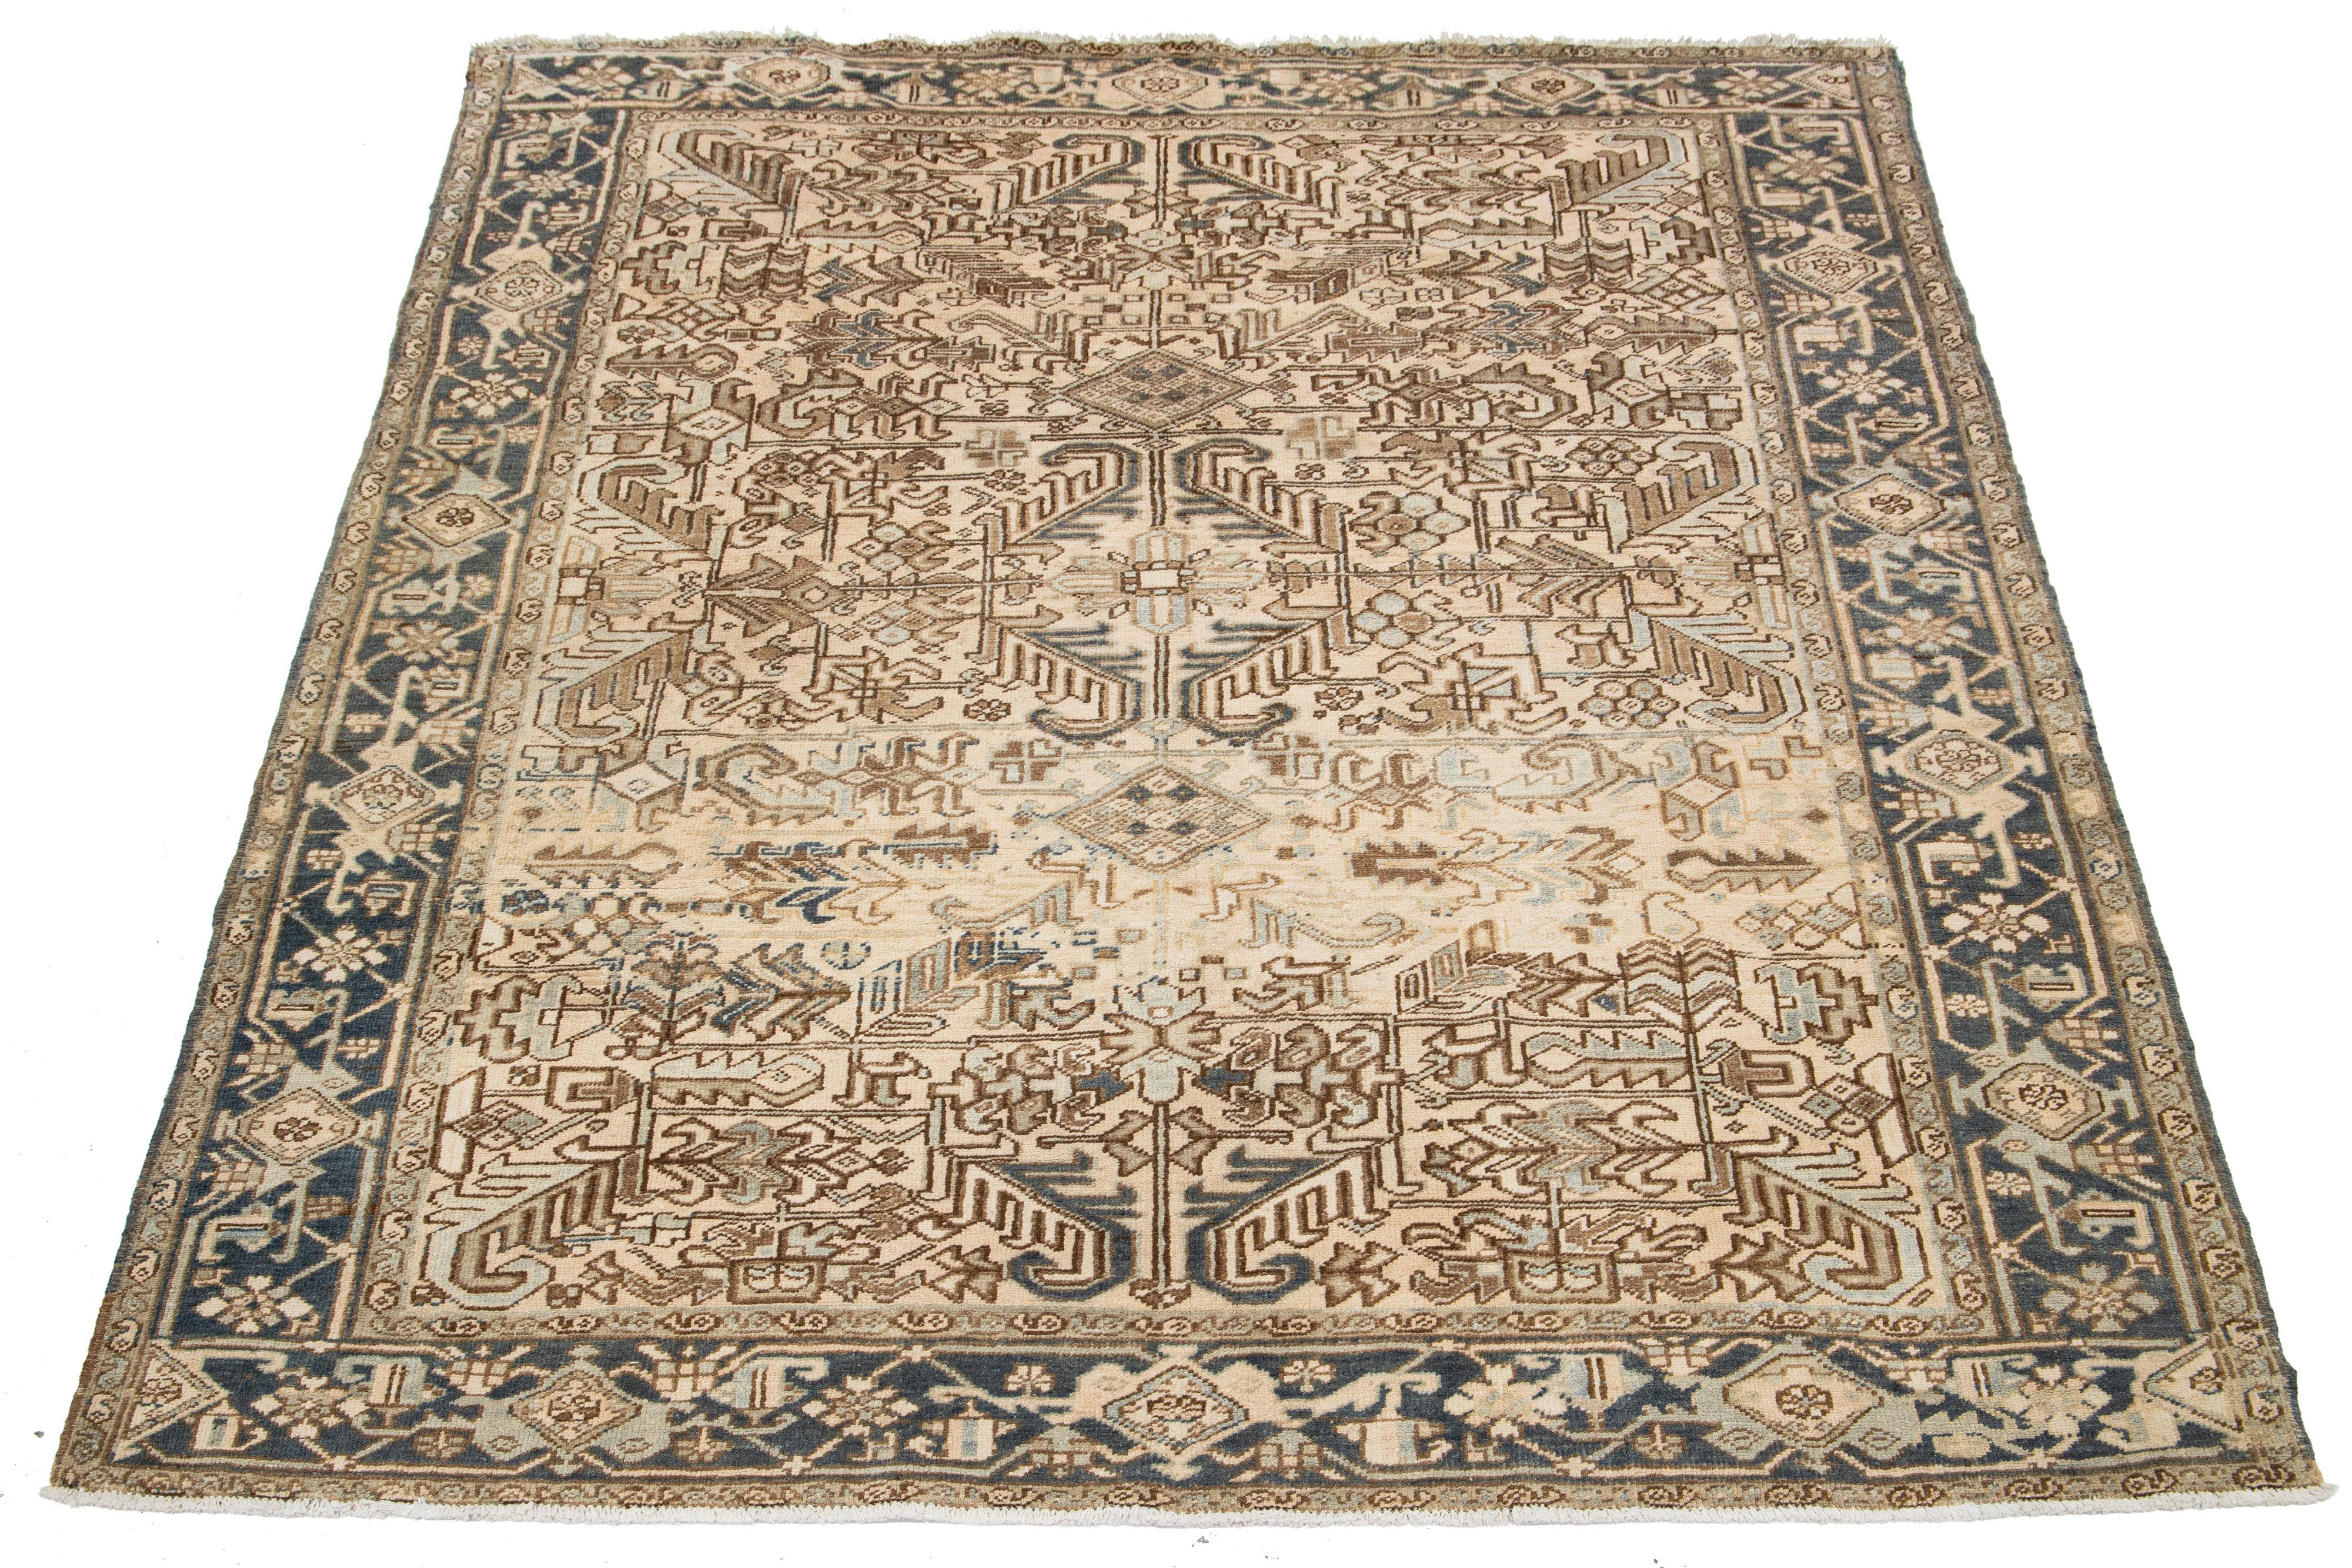 An antique Persian Heriz hand-knotted wool rug features a blue and brown all-over pattern on a beige field.

This rug measures 7'6' x 9'2